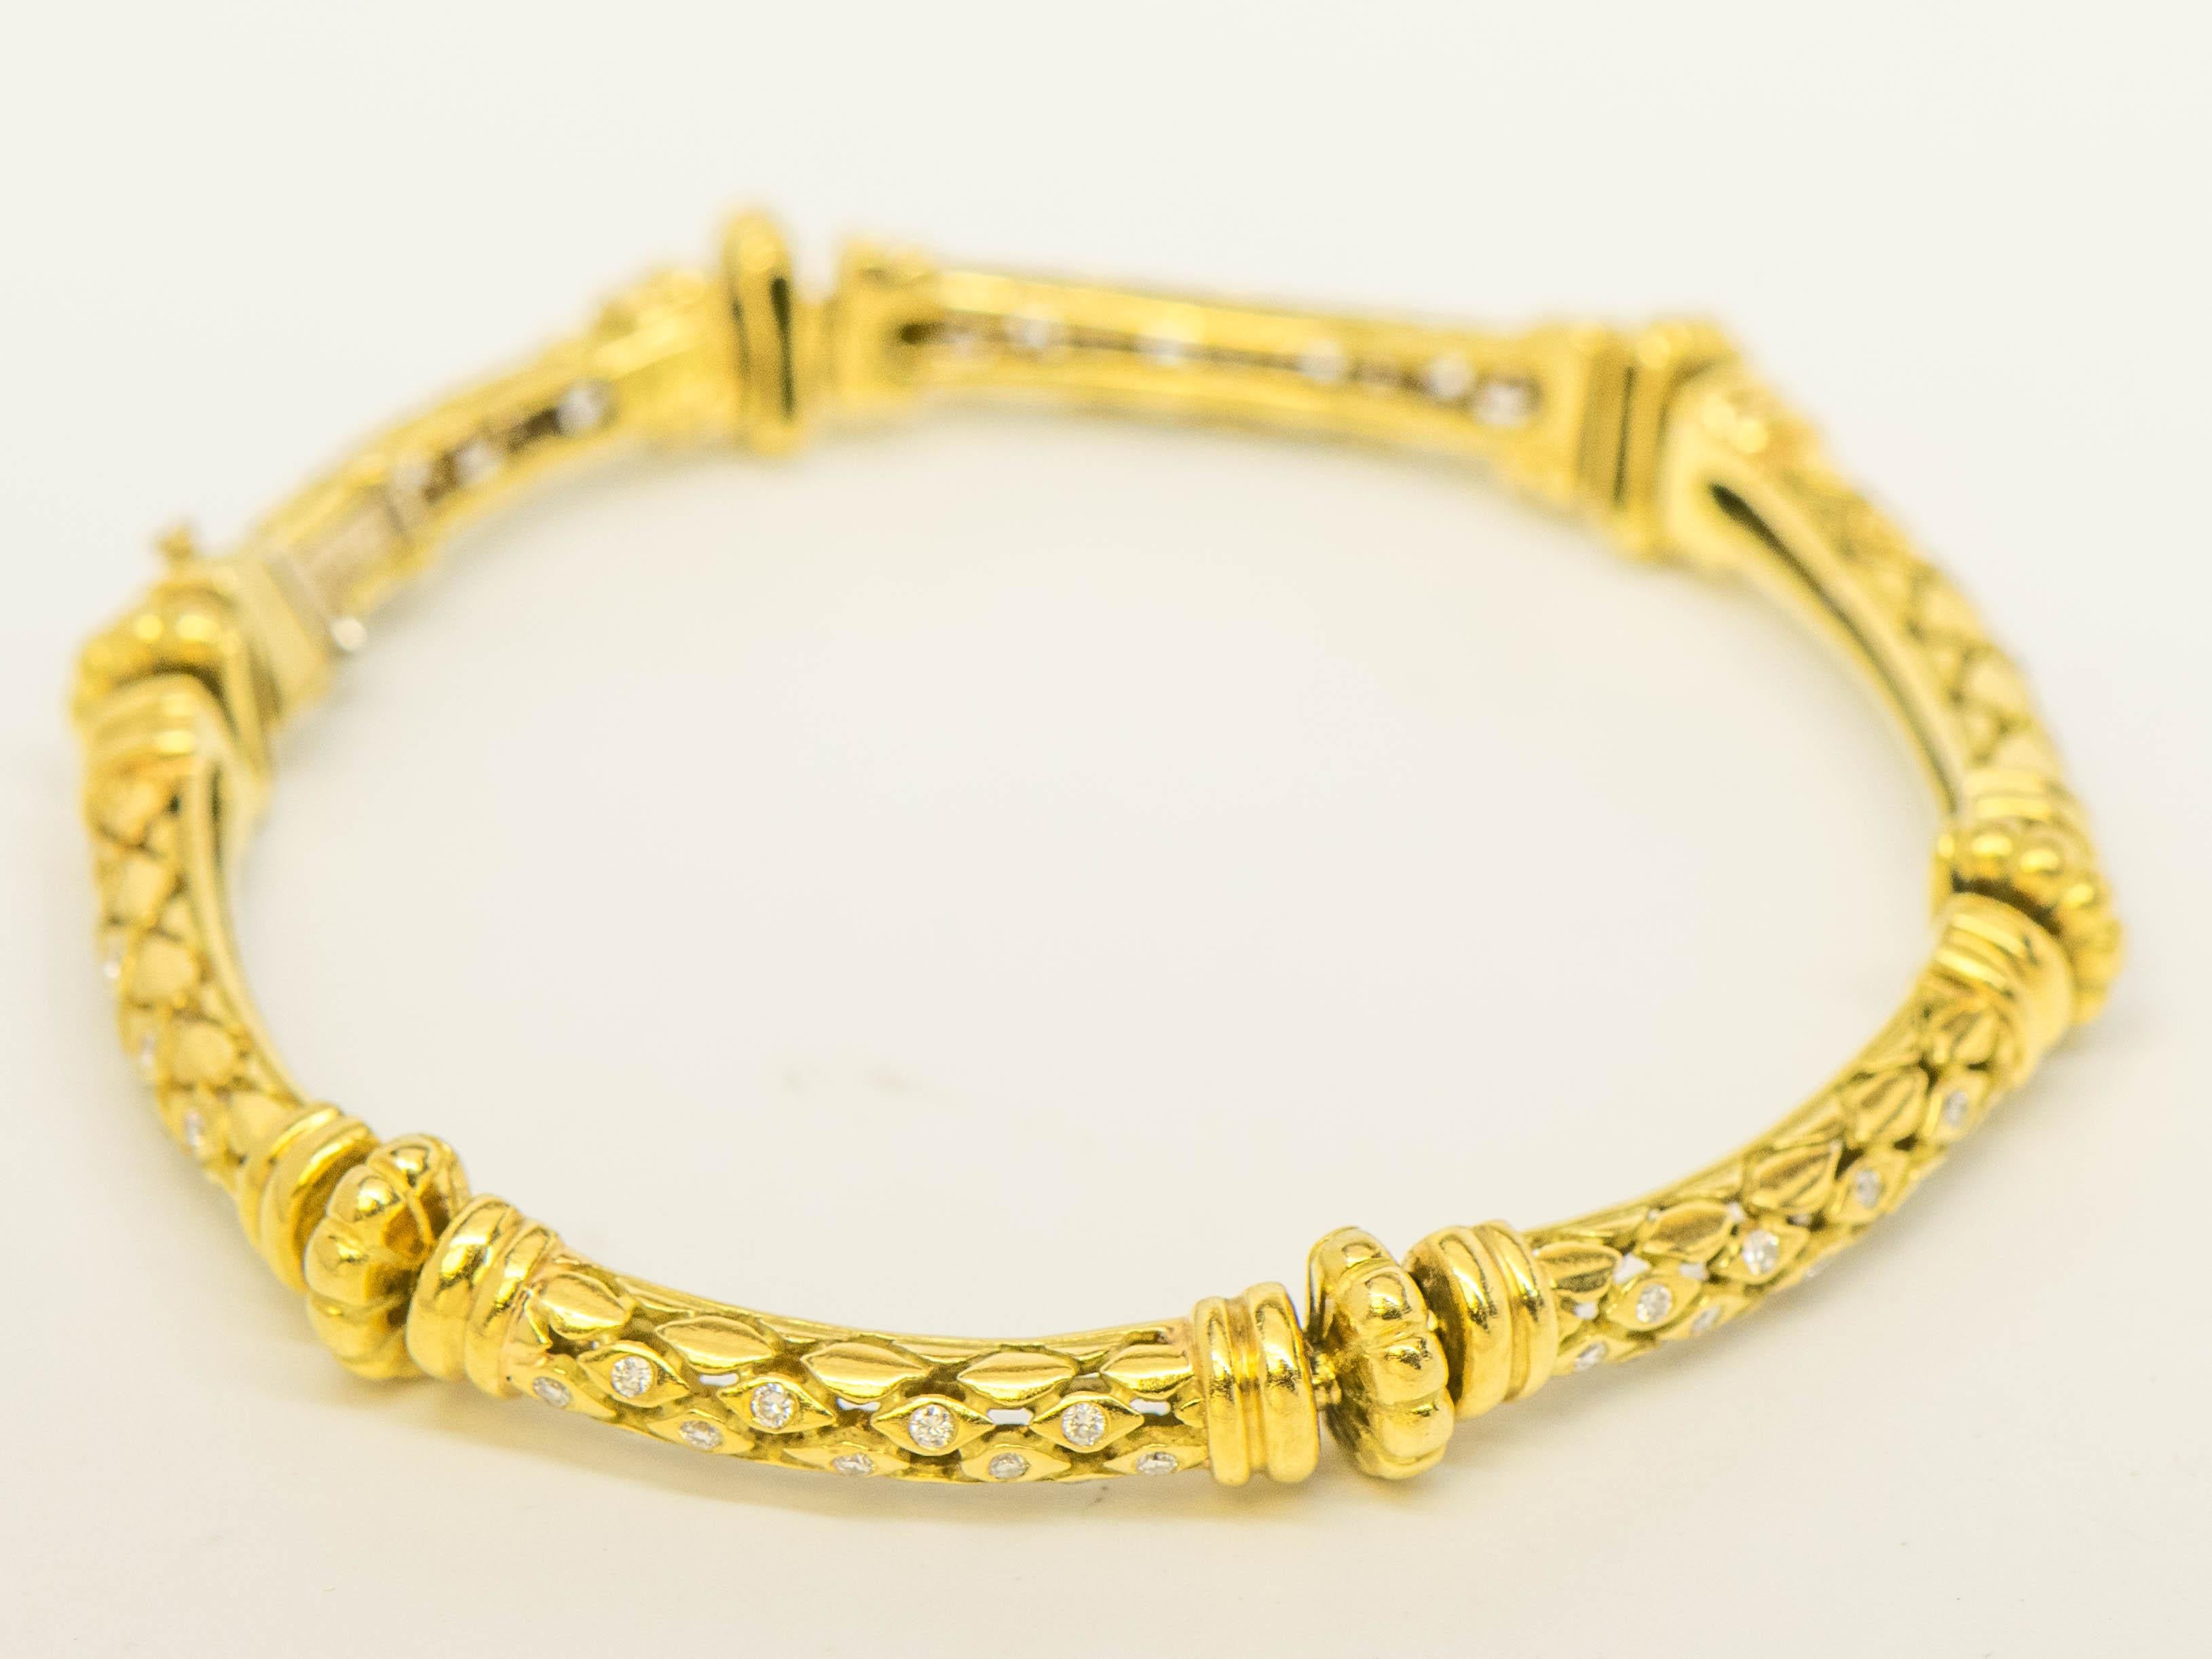 From the well known designer, SeidenGang whose style is appreciated for it's timeless Greek motif fabricated into modern jewelry, is this 18K Yellow Gold Bracelet. This stunning Bracelet is fashioned in a Floral Motif with (77) Round Brilliant Cut